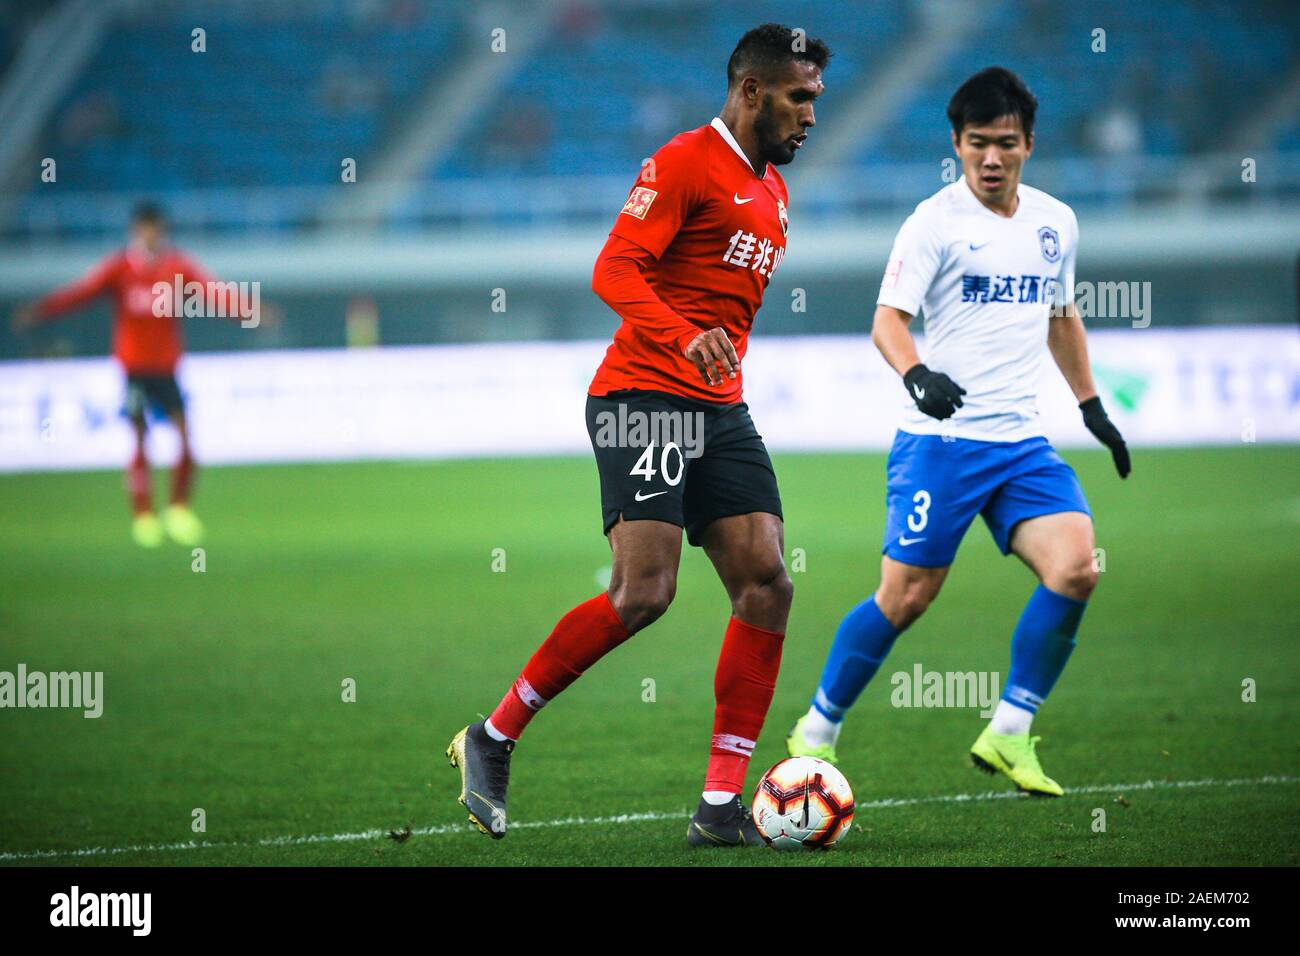 Brazilian-born Portuguese football player Dyego Sousa of Shenzhen F.C., left, keeps the ball during the 28th round match of Chinese Football Associati Stock Photo